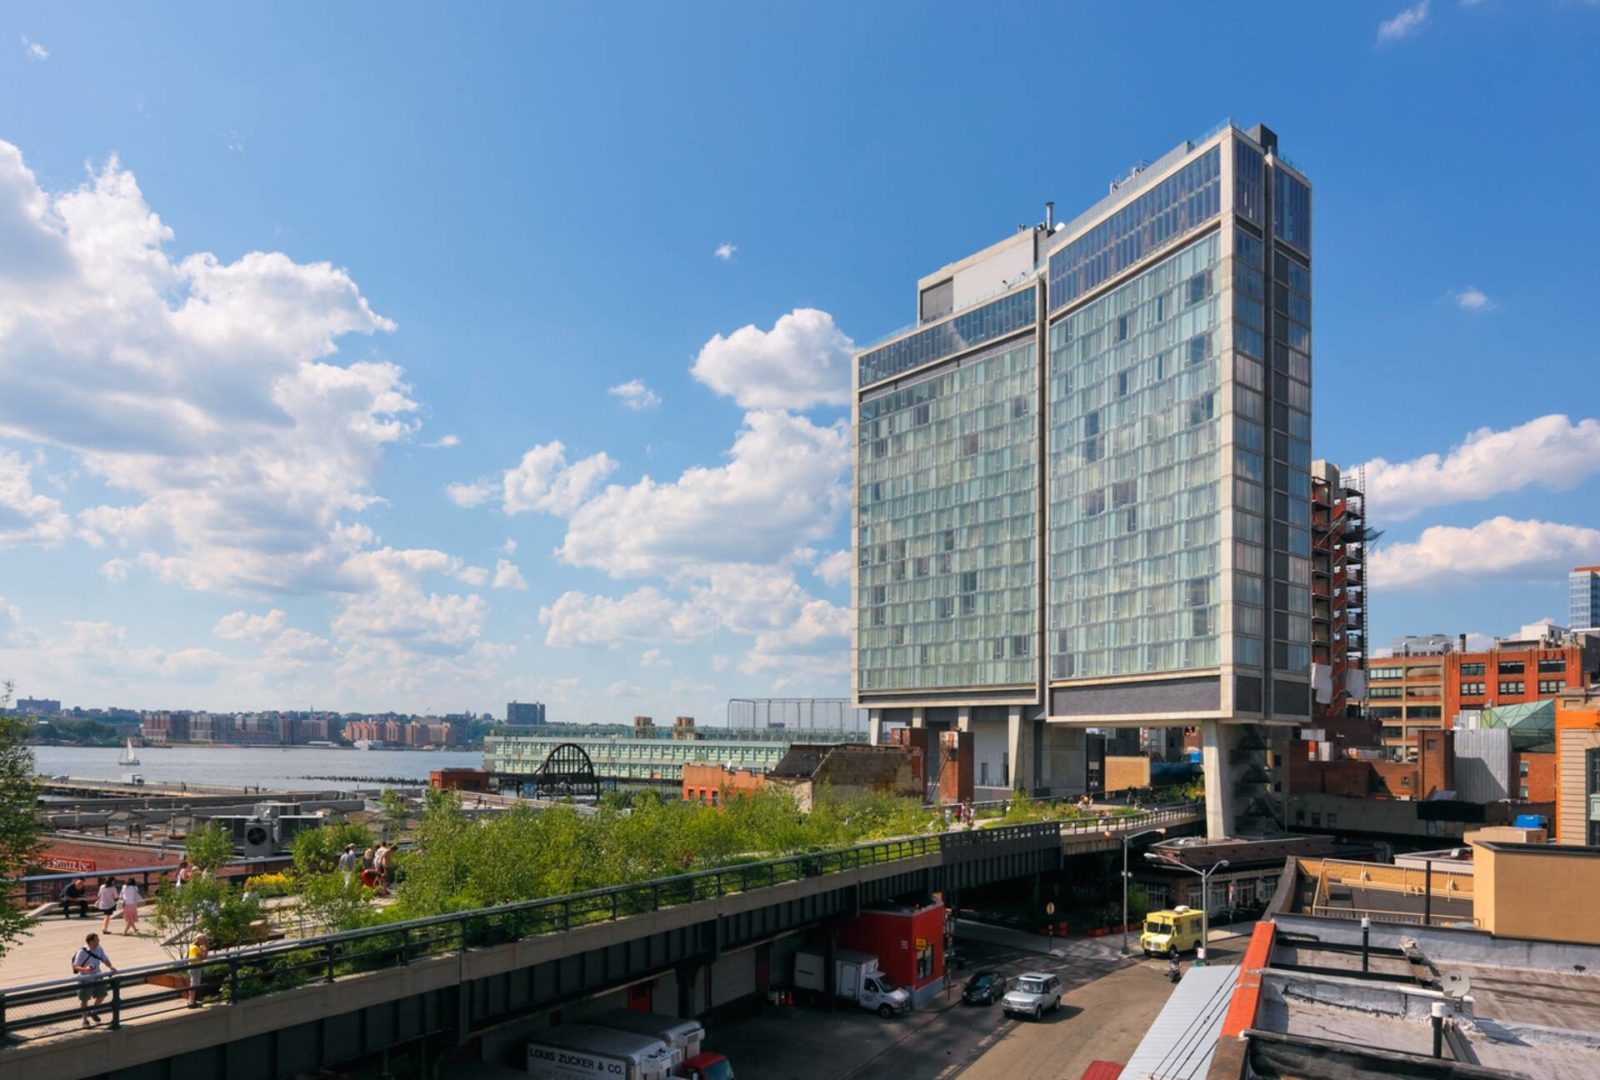 Best Things to do Along the High Line